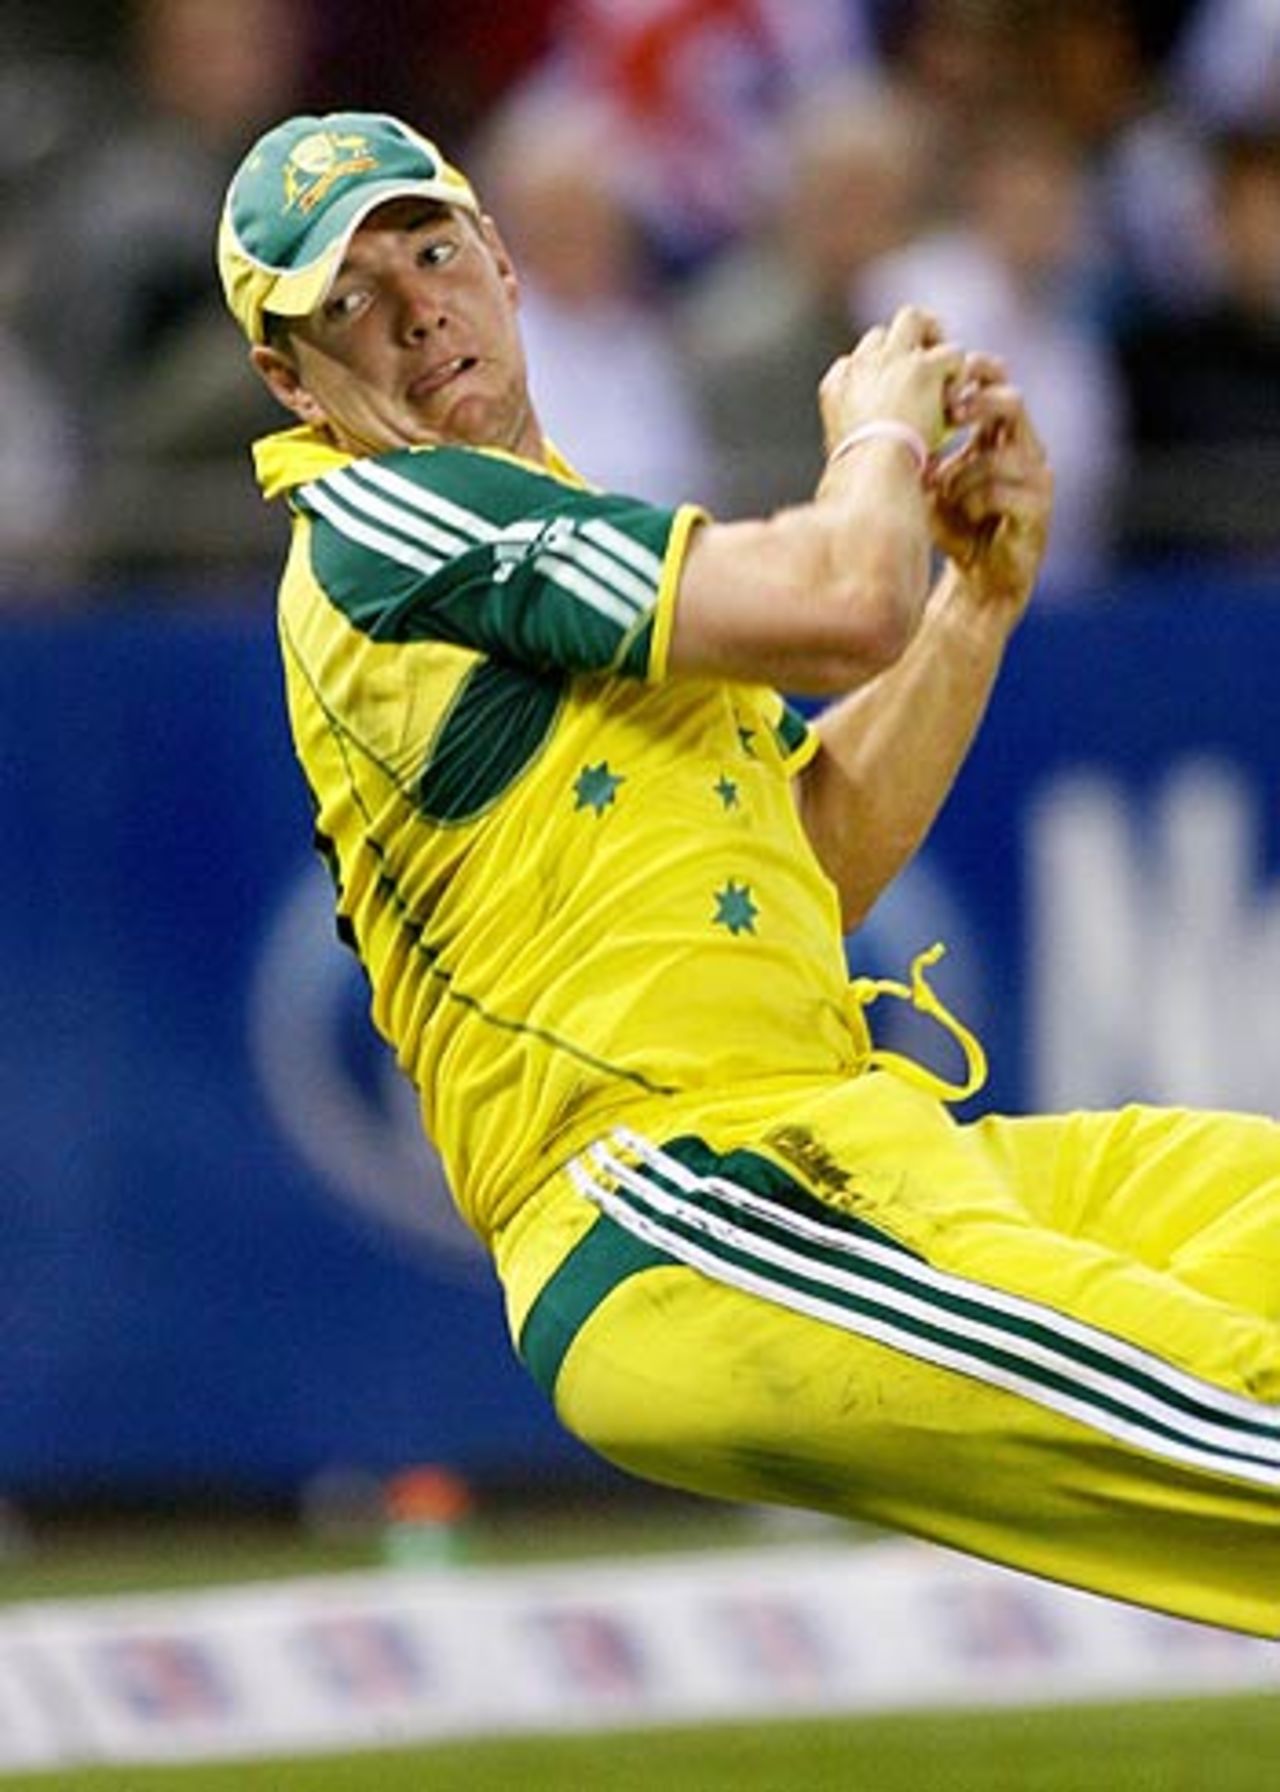 James Hopes takes a well judged catch falling backwards to dismiss Justin Kemp,  Australia v South Africa, VB Series, Melbourne, February 3 2006